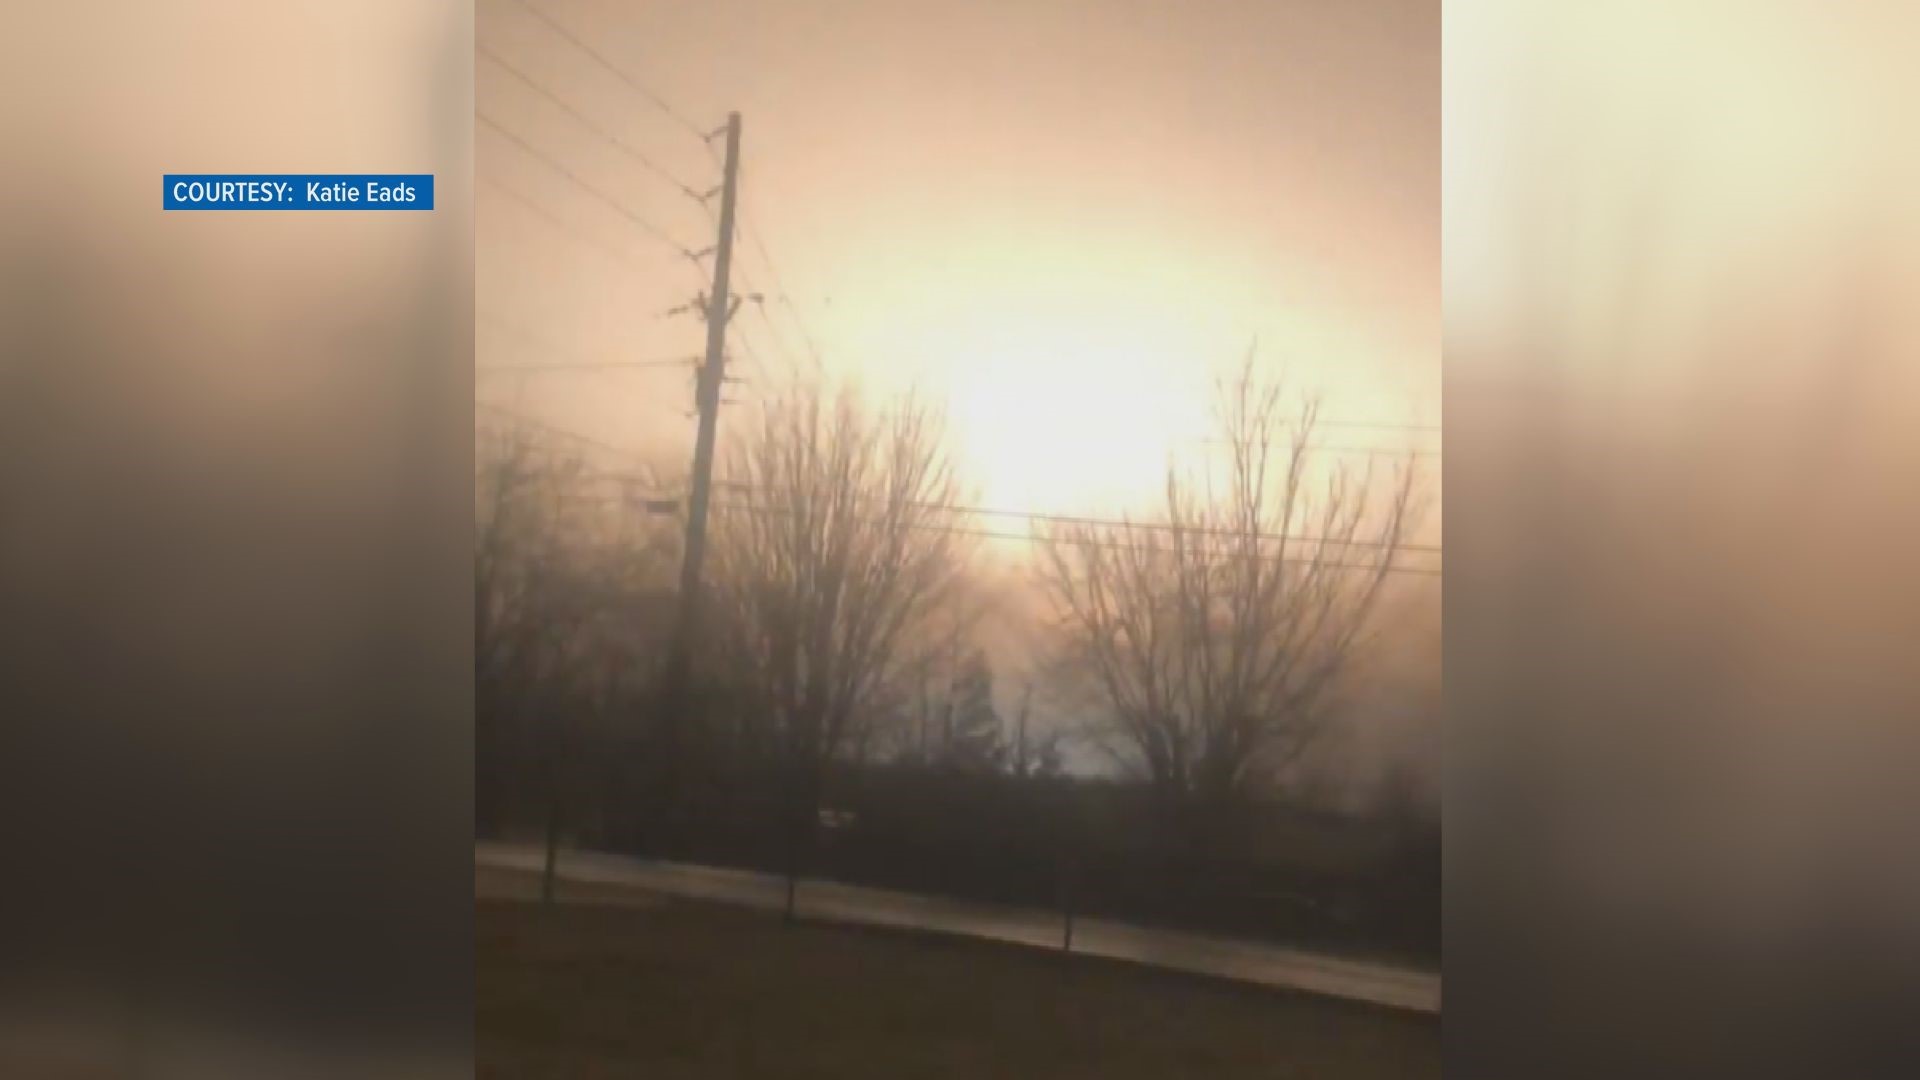 Nearly 20,000 people lose power Sunday morning when a transformer near Crossville "blows up"